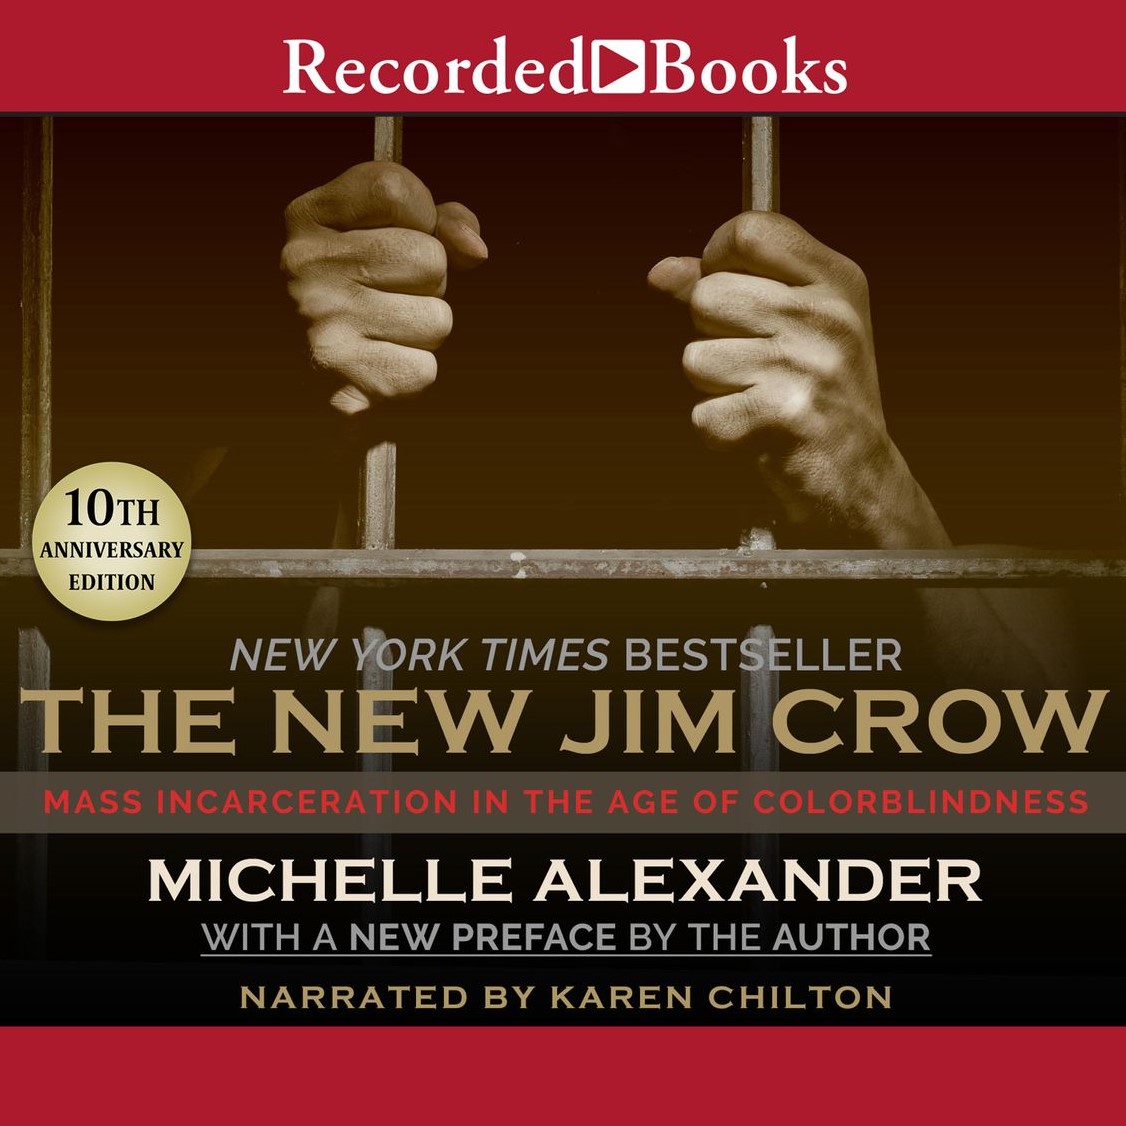 Cover of Michelle Alexander's 'The New Jim Crow'